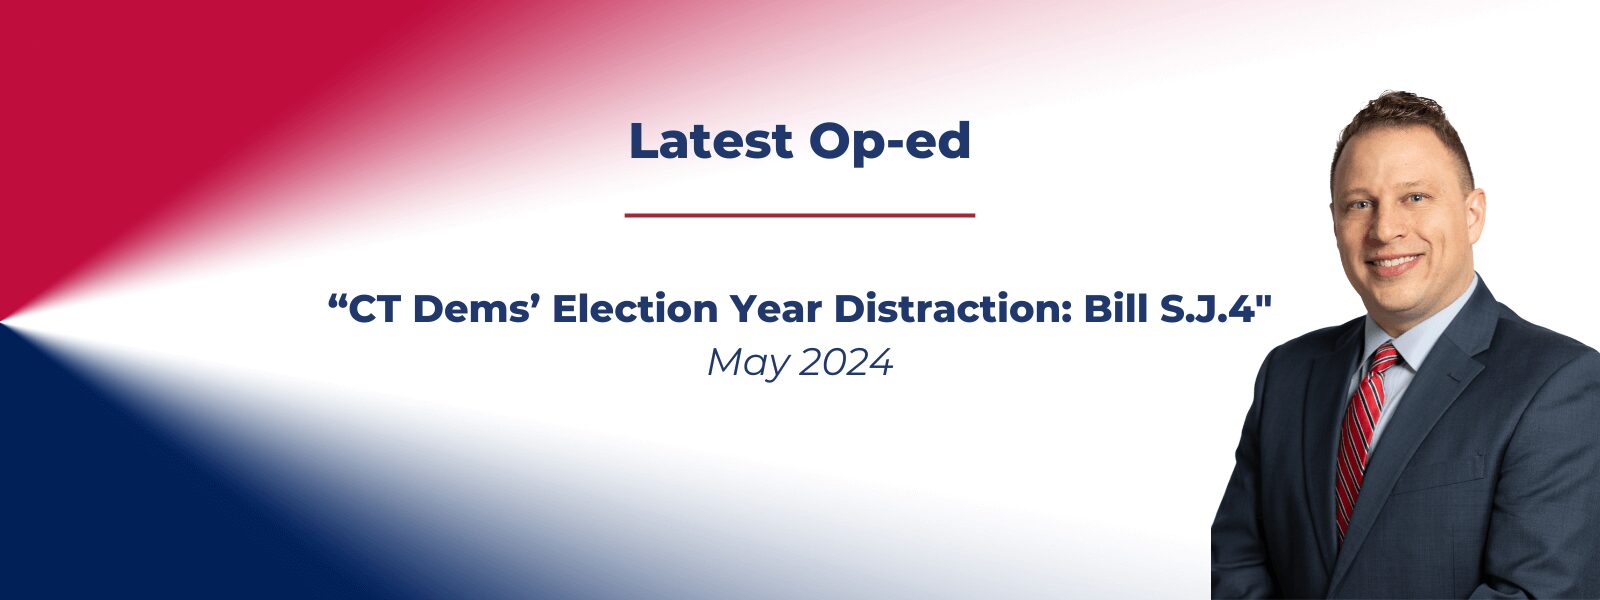 Latest Op-ed | CT Dems’ Election Year Distraction: Bill S.J.4 (May 2024)